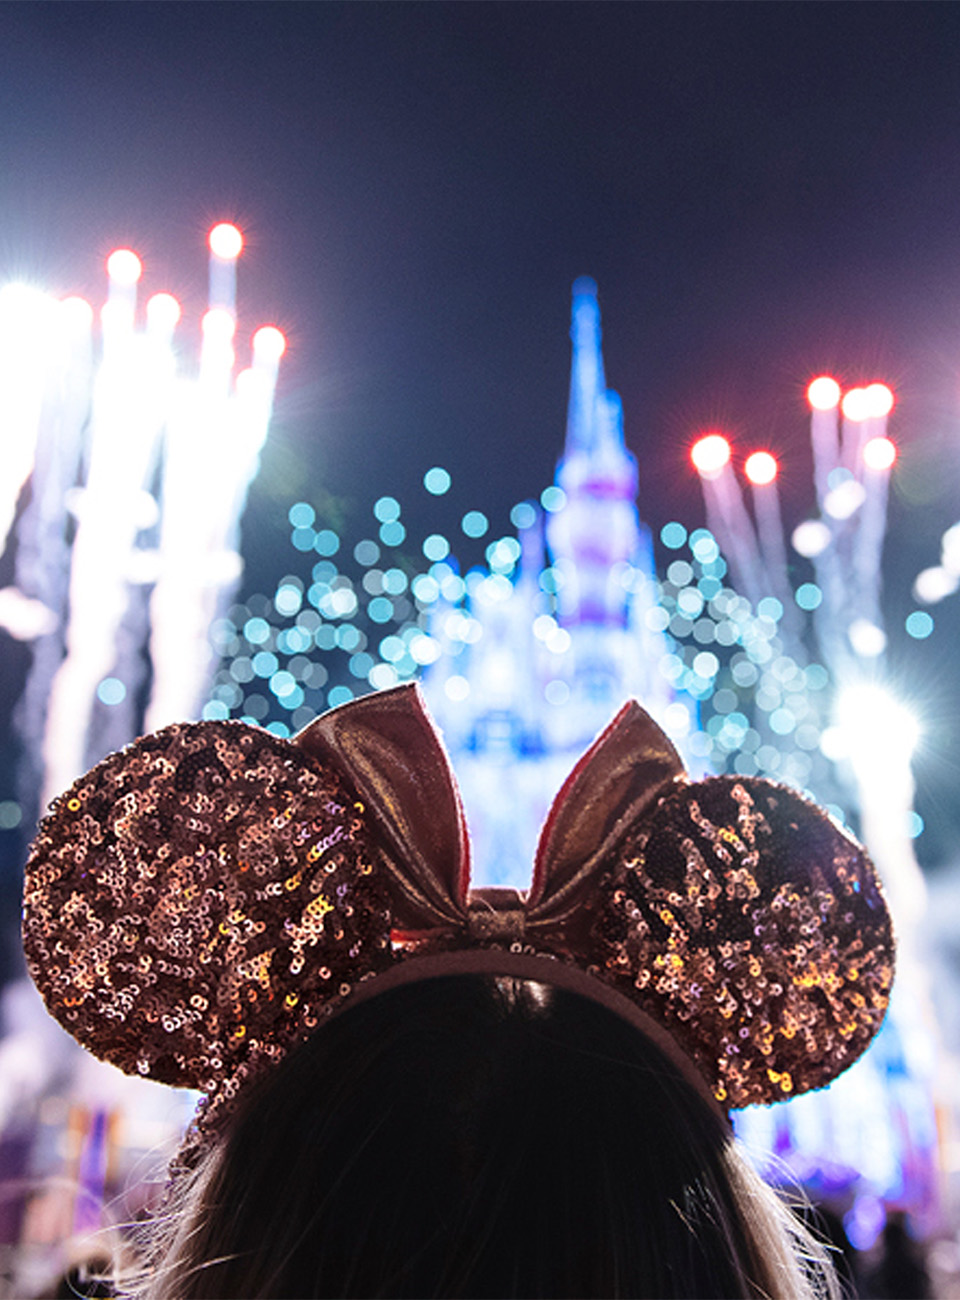 Minnie Mouse ears and Disneyland fireworks